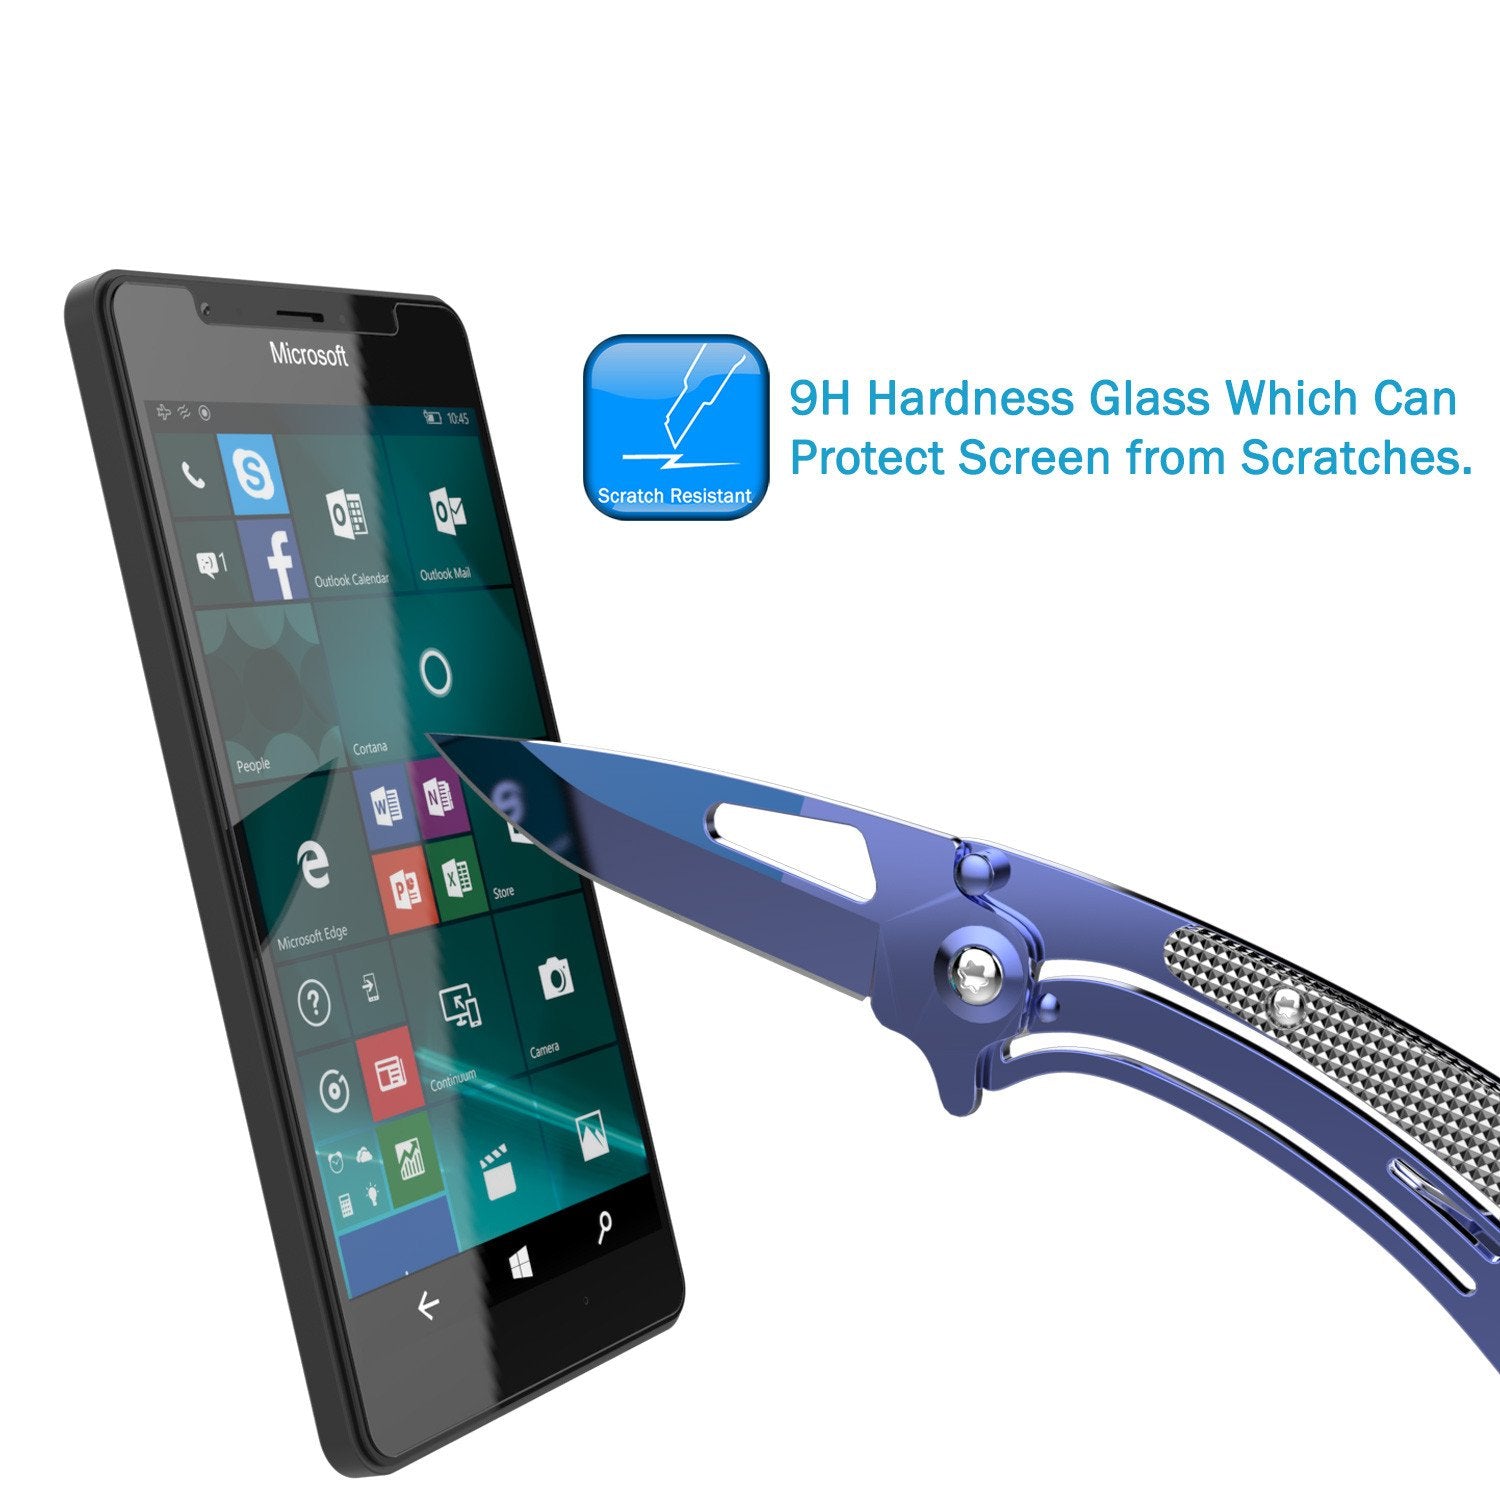 Microsoft Lumia 950 XL Screen Protector, Punkcase SHIELD Tempered Glass Protector 0.33mm Thick 9H